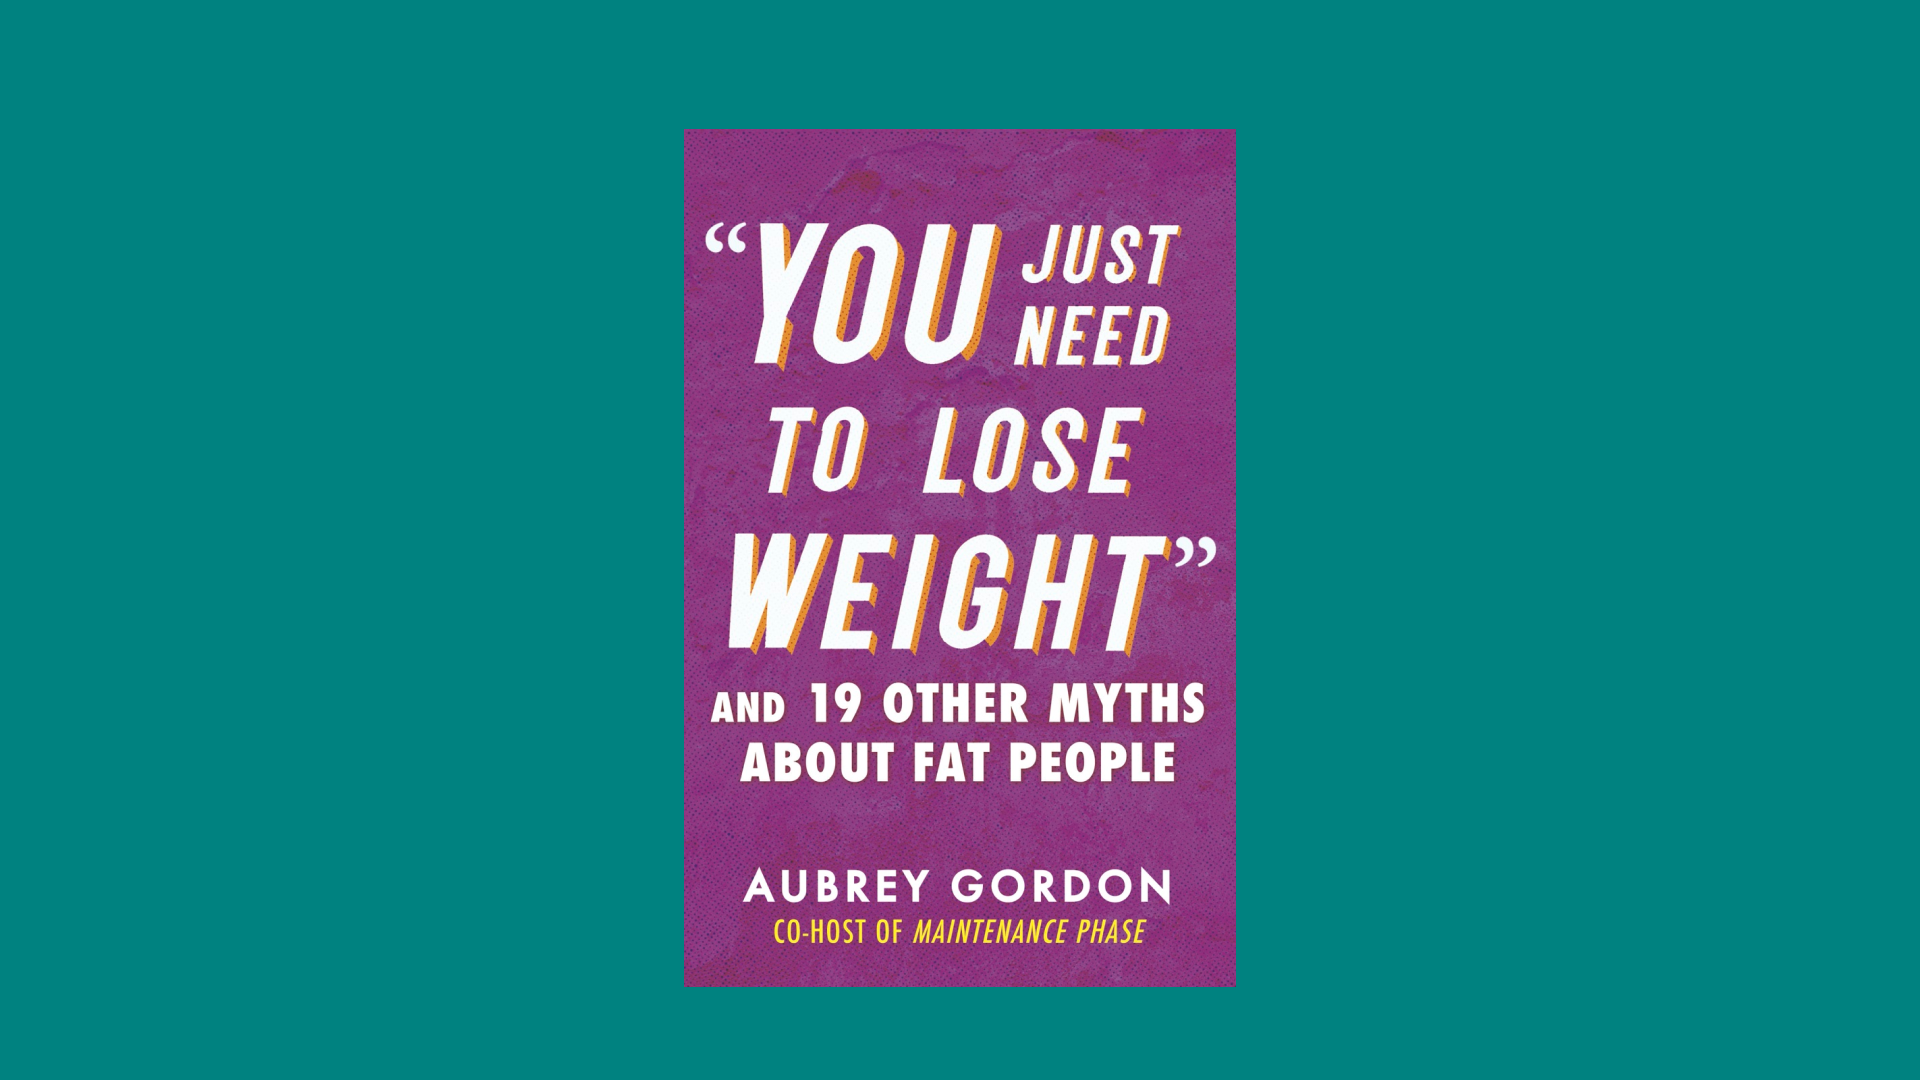 “‘You Just Need to Lose Weight’ And 19 Other Myths About Fat People” by Aubrey Gordon